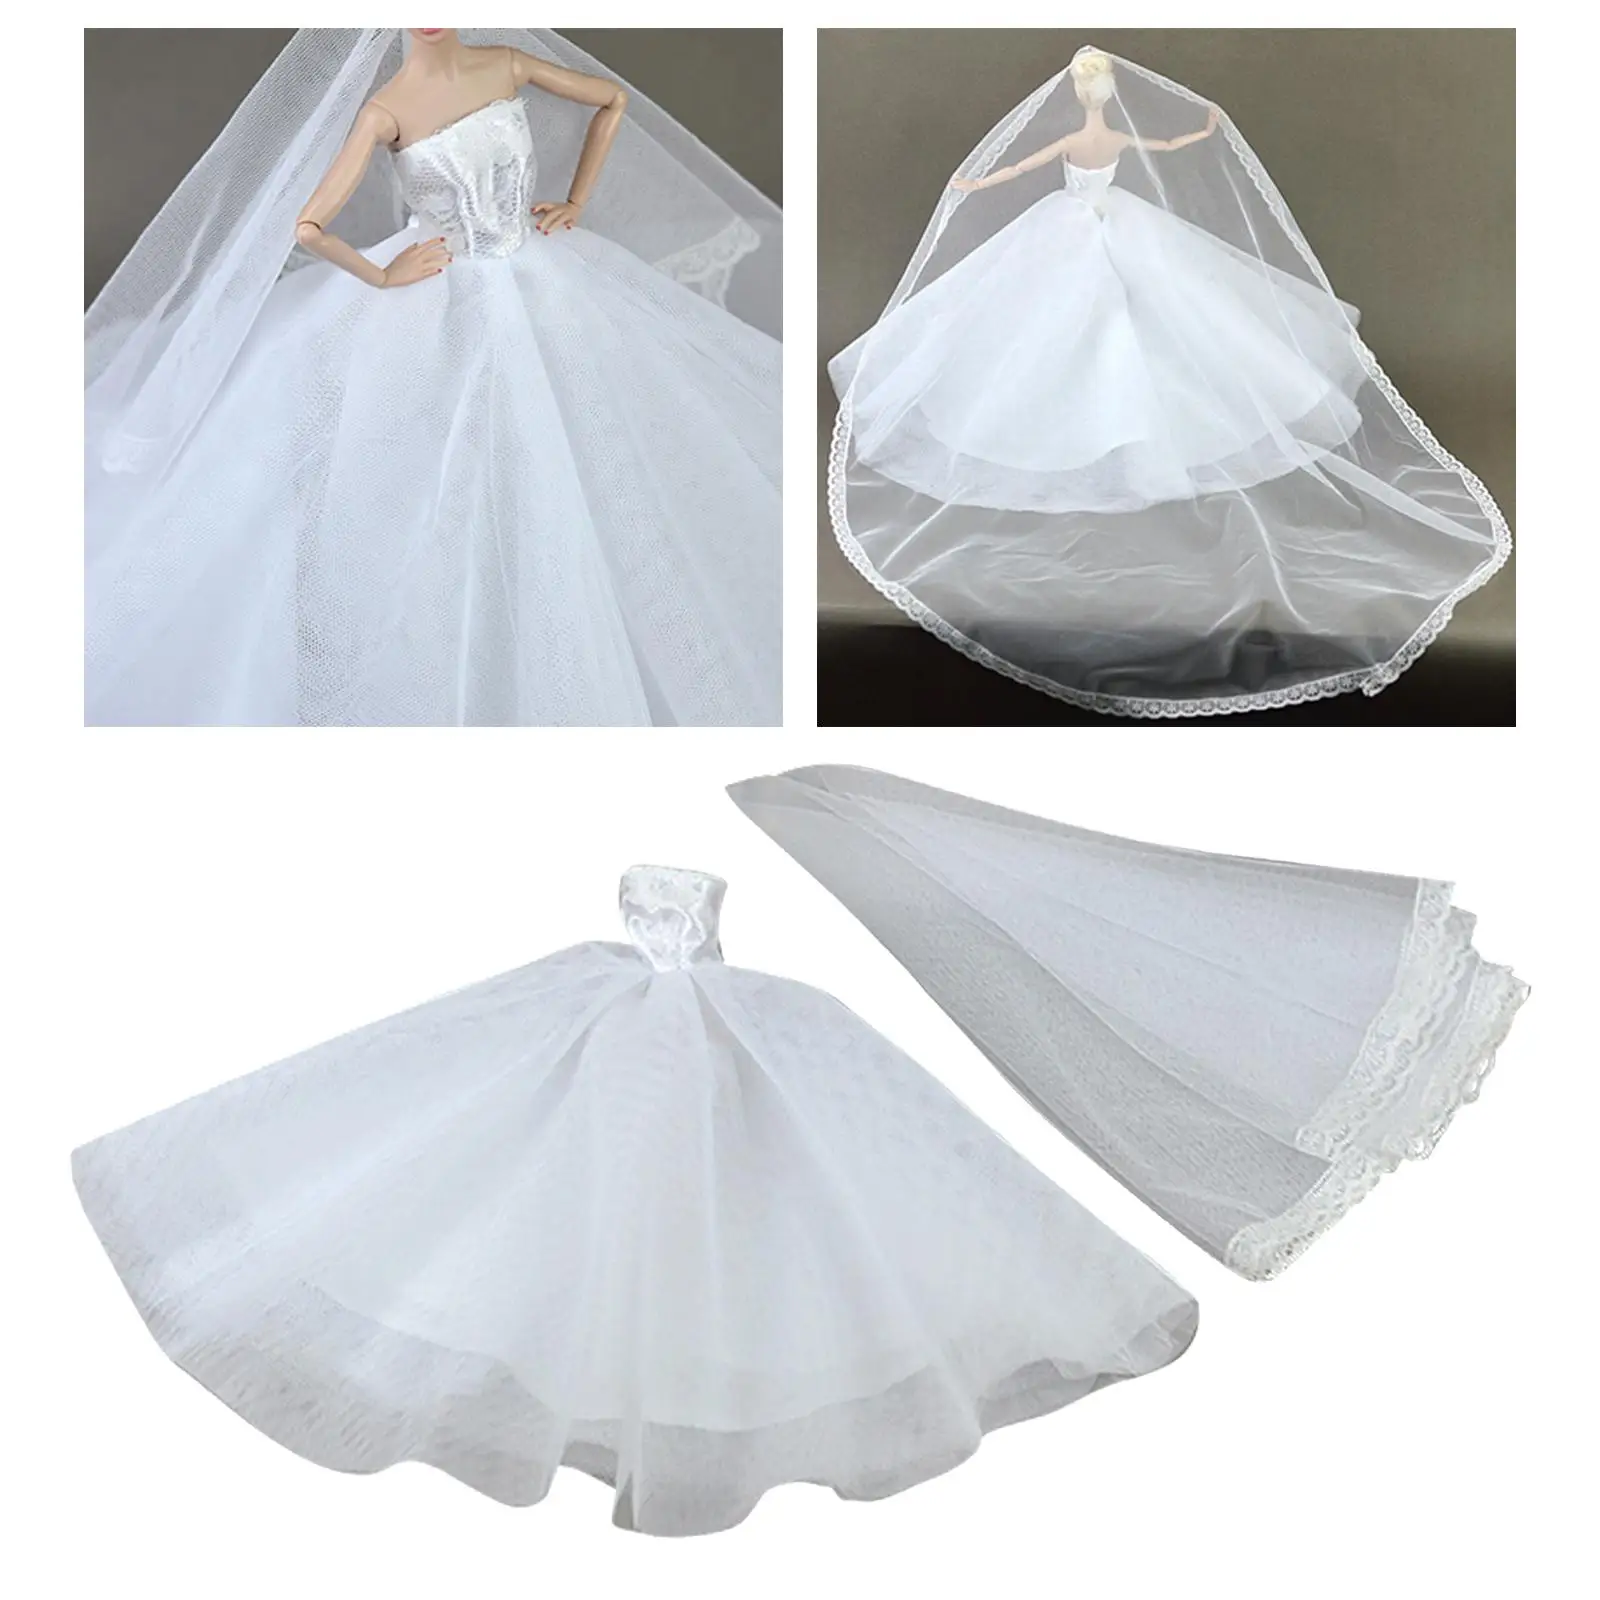 Fashion 1/6 Dolls Wedding Dress, Dolls Gown Dress, Evening Party Clothes Outfits for 12inch Dolls Clothing Dress